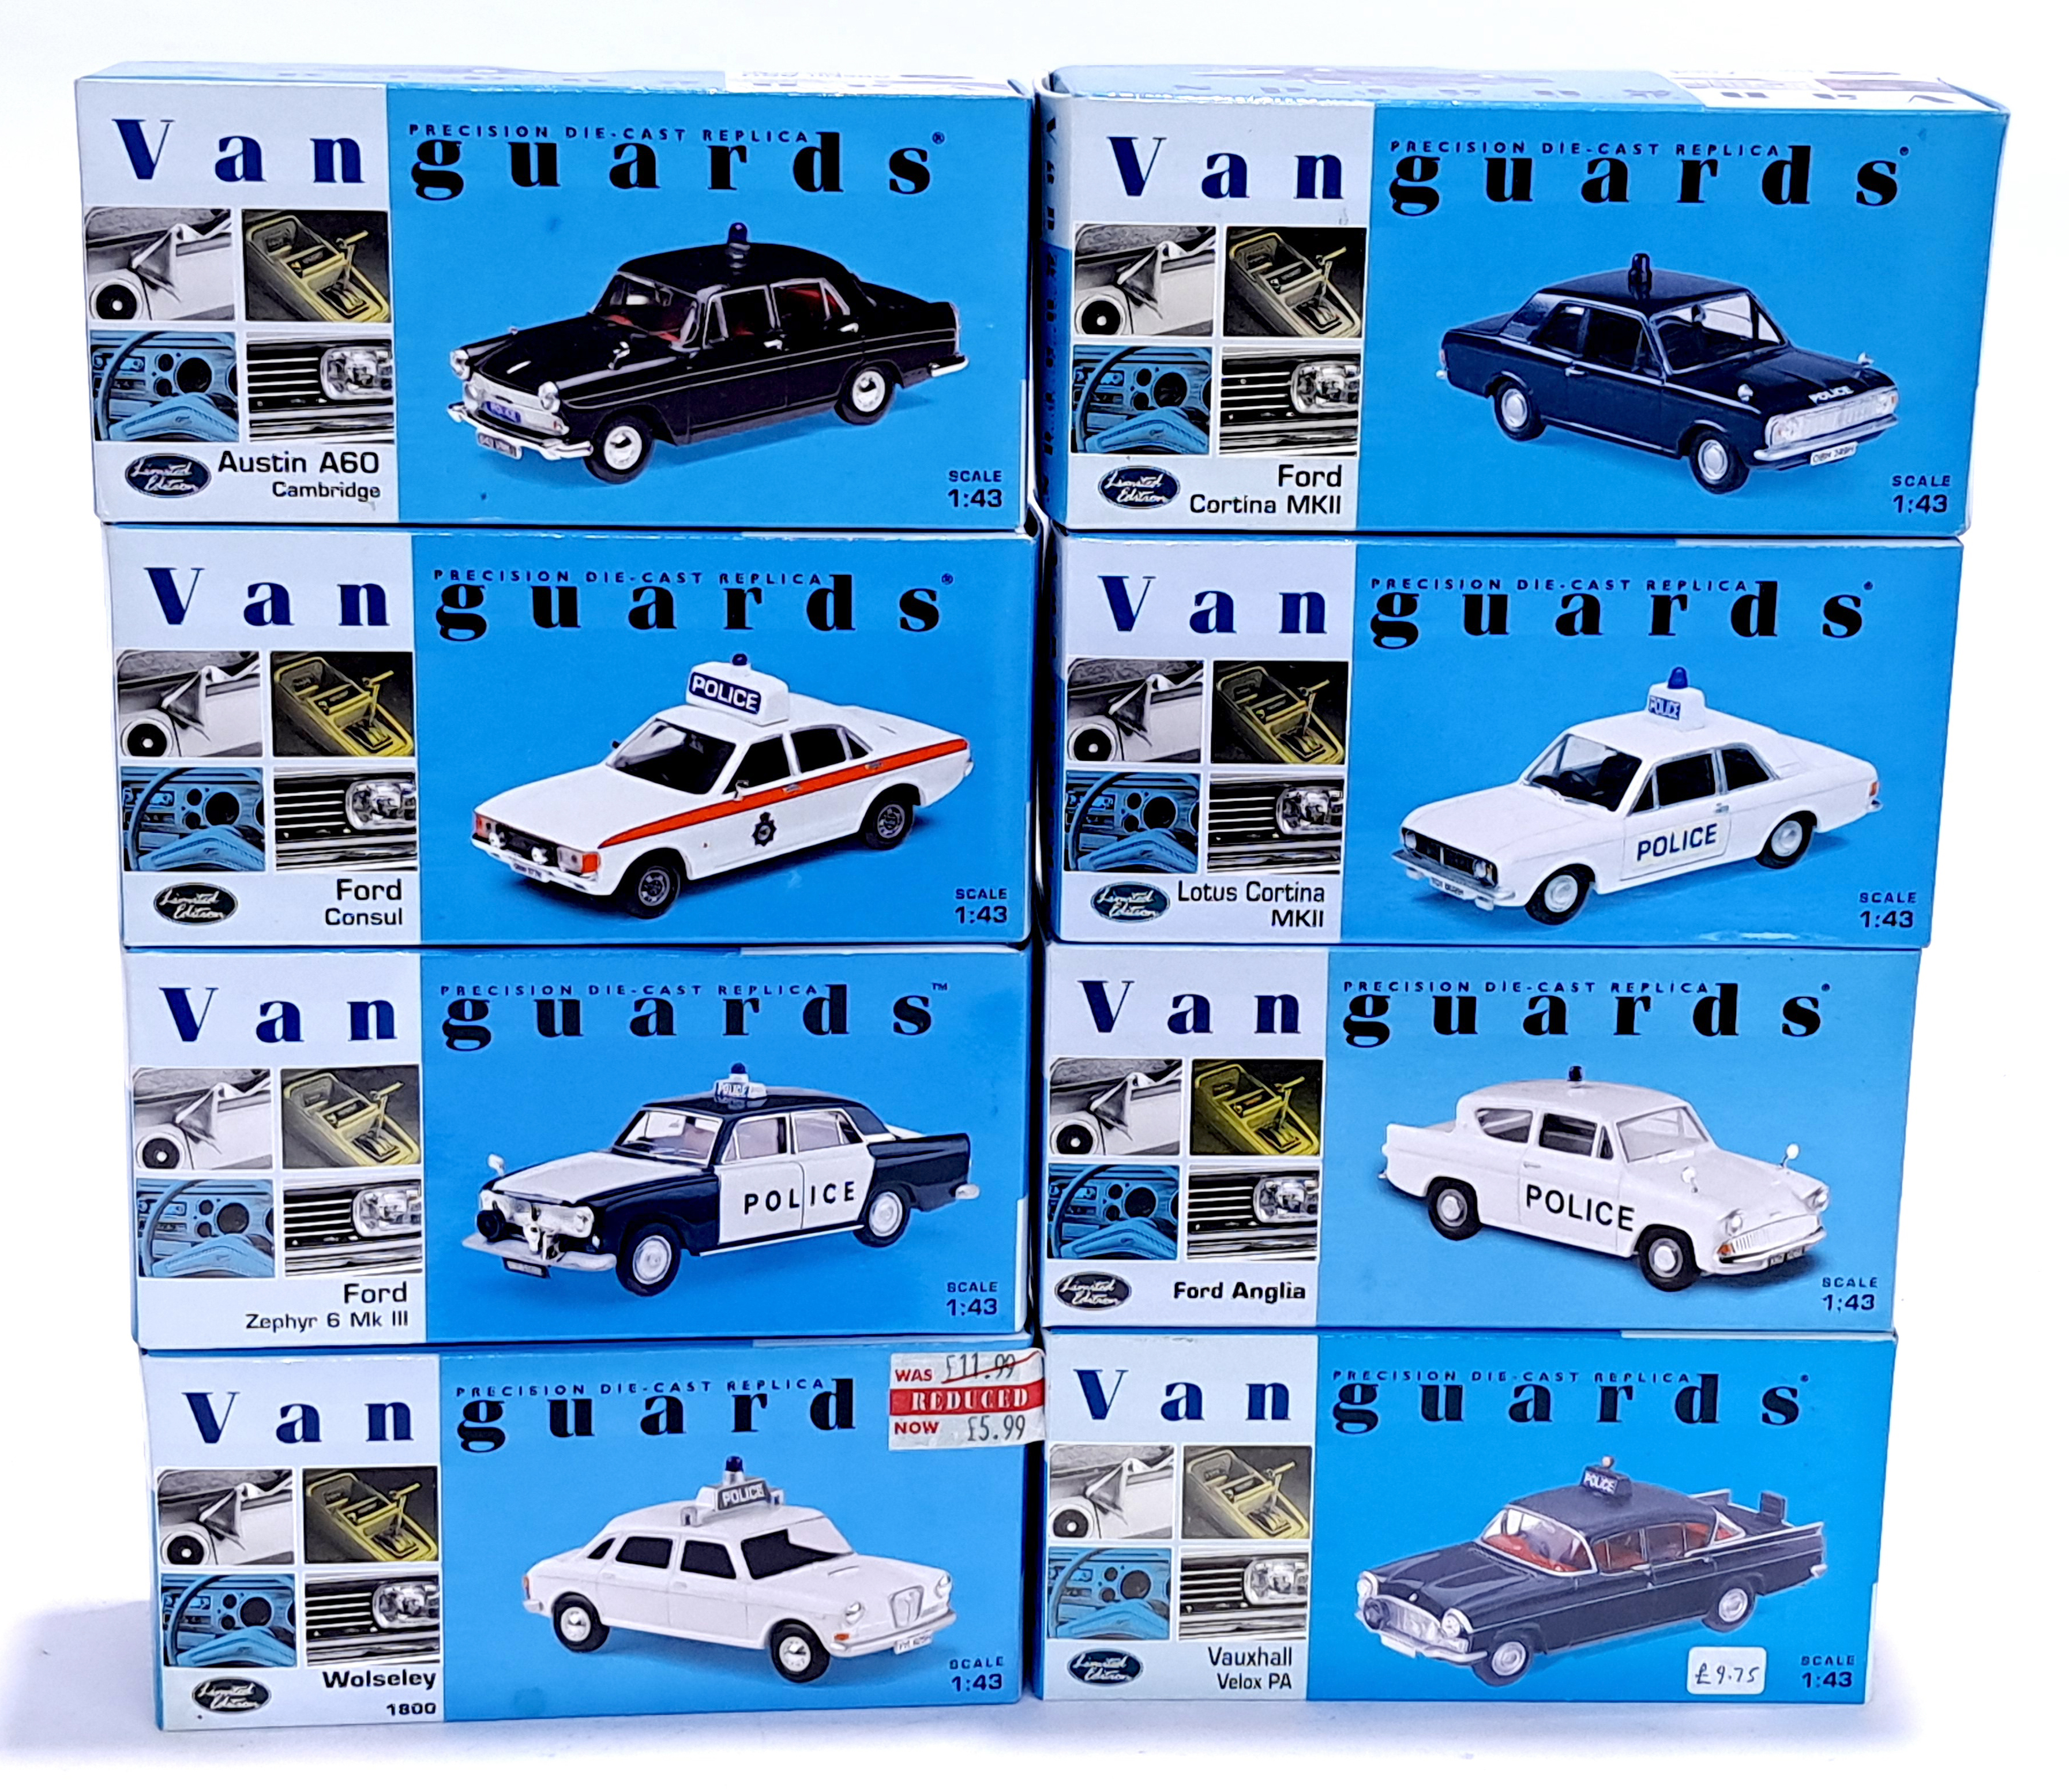 Lledo Vanguards, a boxed 1:43 scale Police group